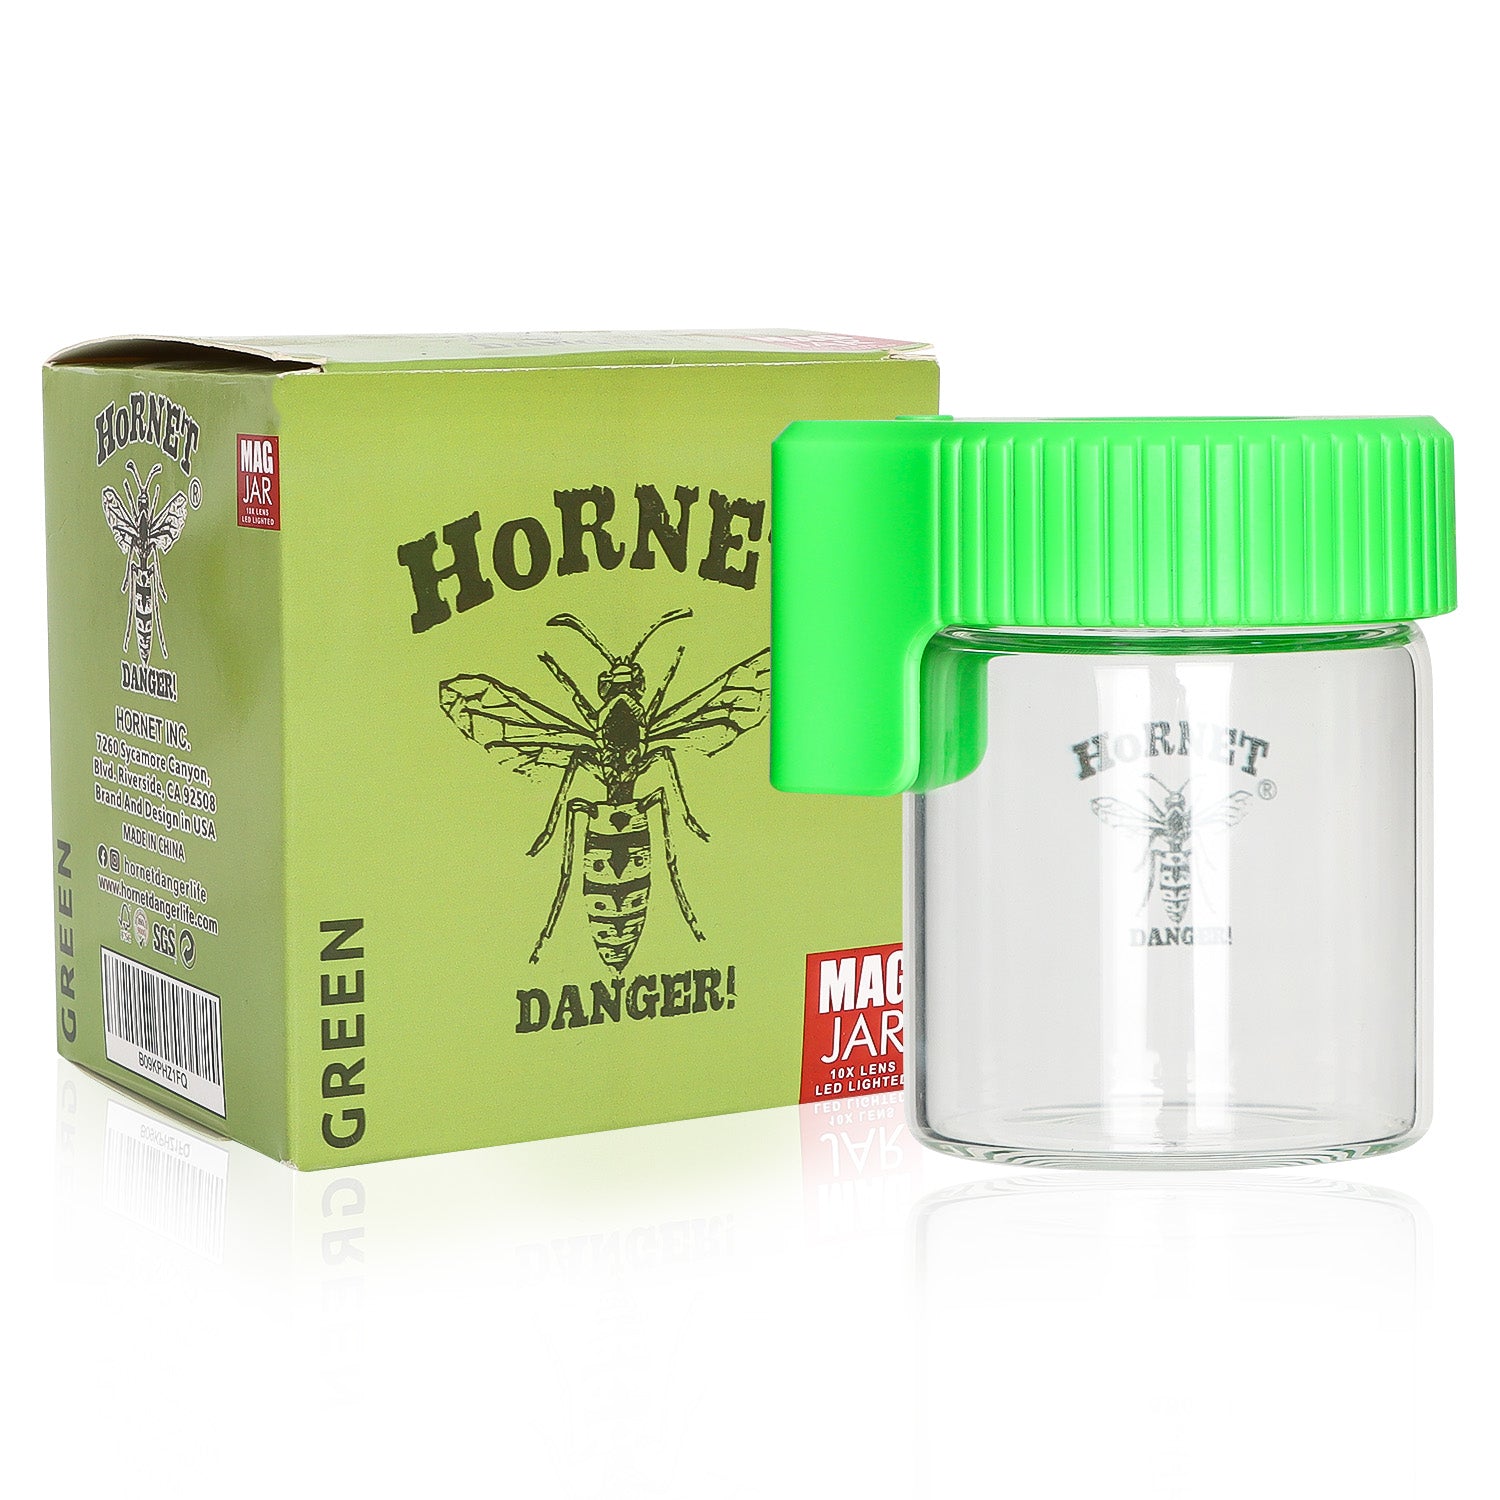 HORNET Light-Up Led Glass Storage Jar, Air Tight & Magnifying View Jar, Green Color Jar Lid, Rechargeable Glass Jar